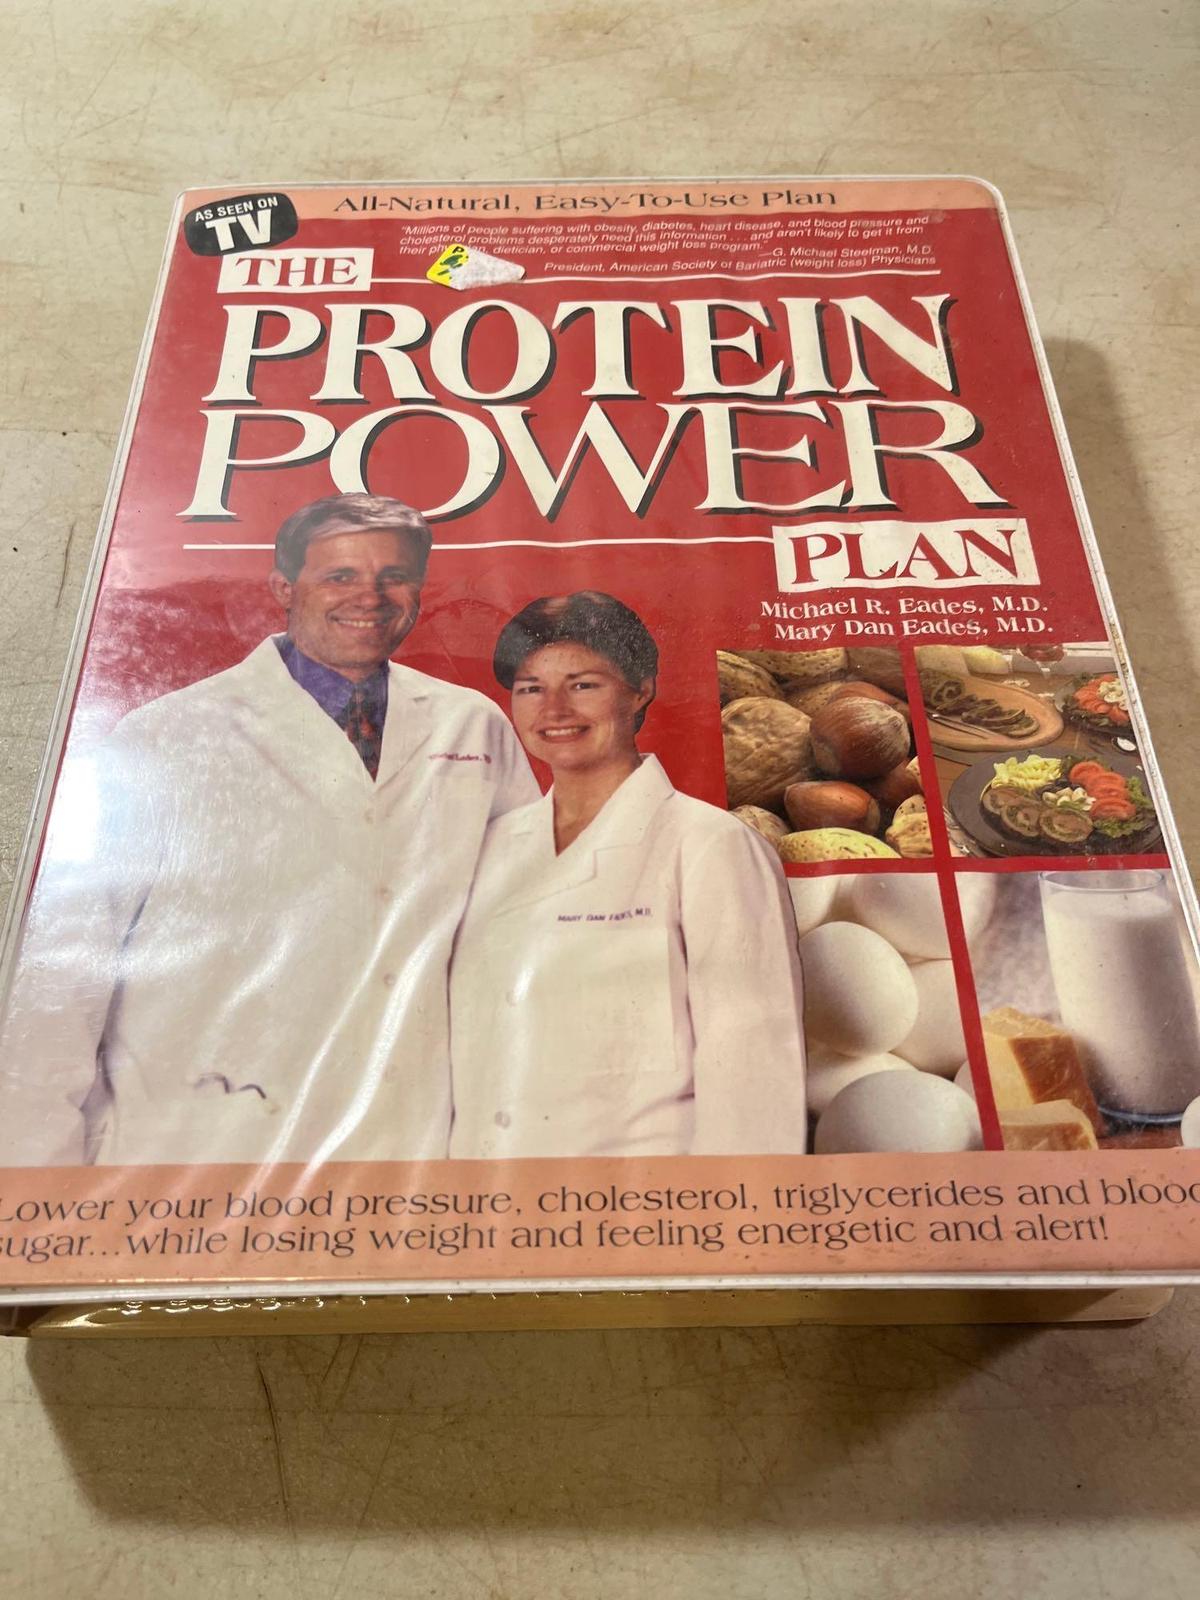 The Protein Power Plan Book, Cassettes and VHS Tape In Case